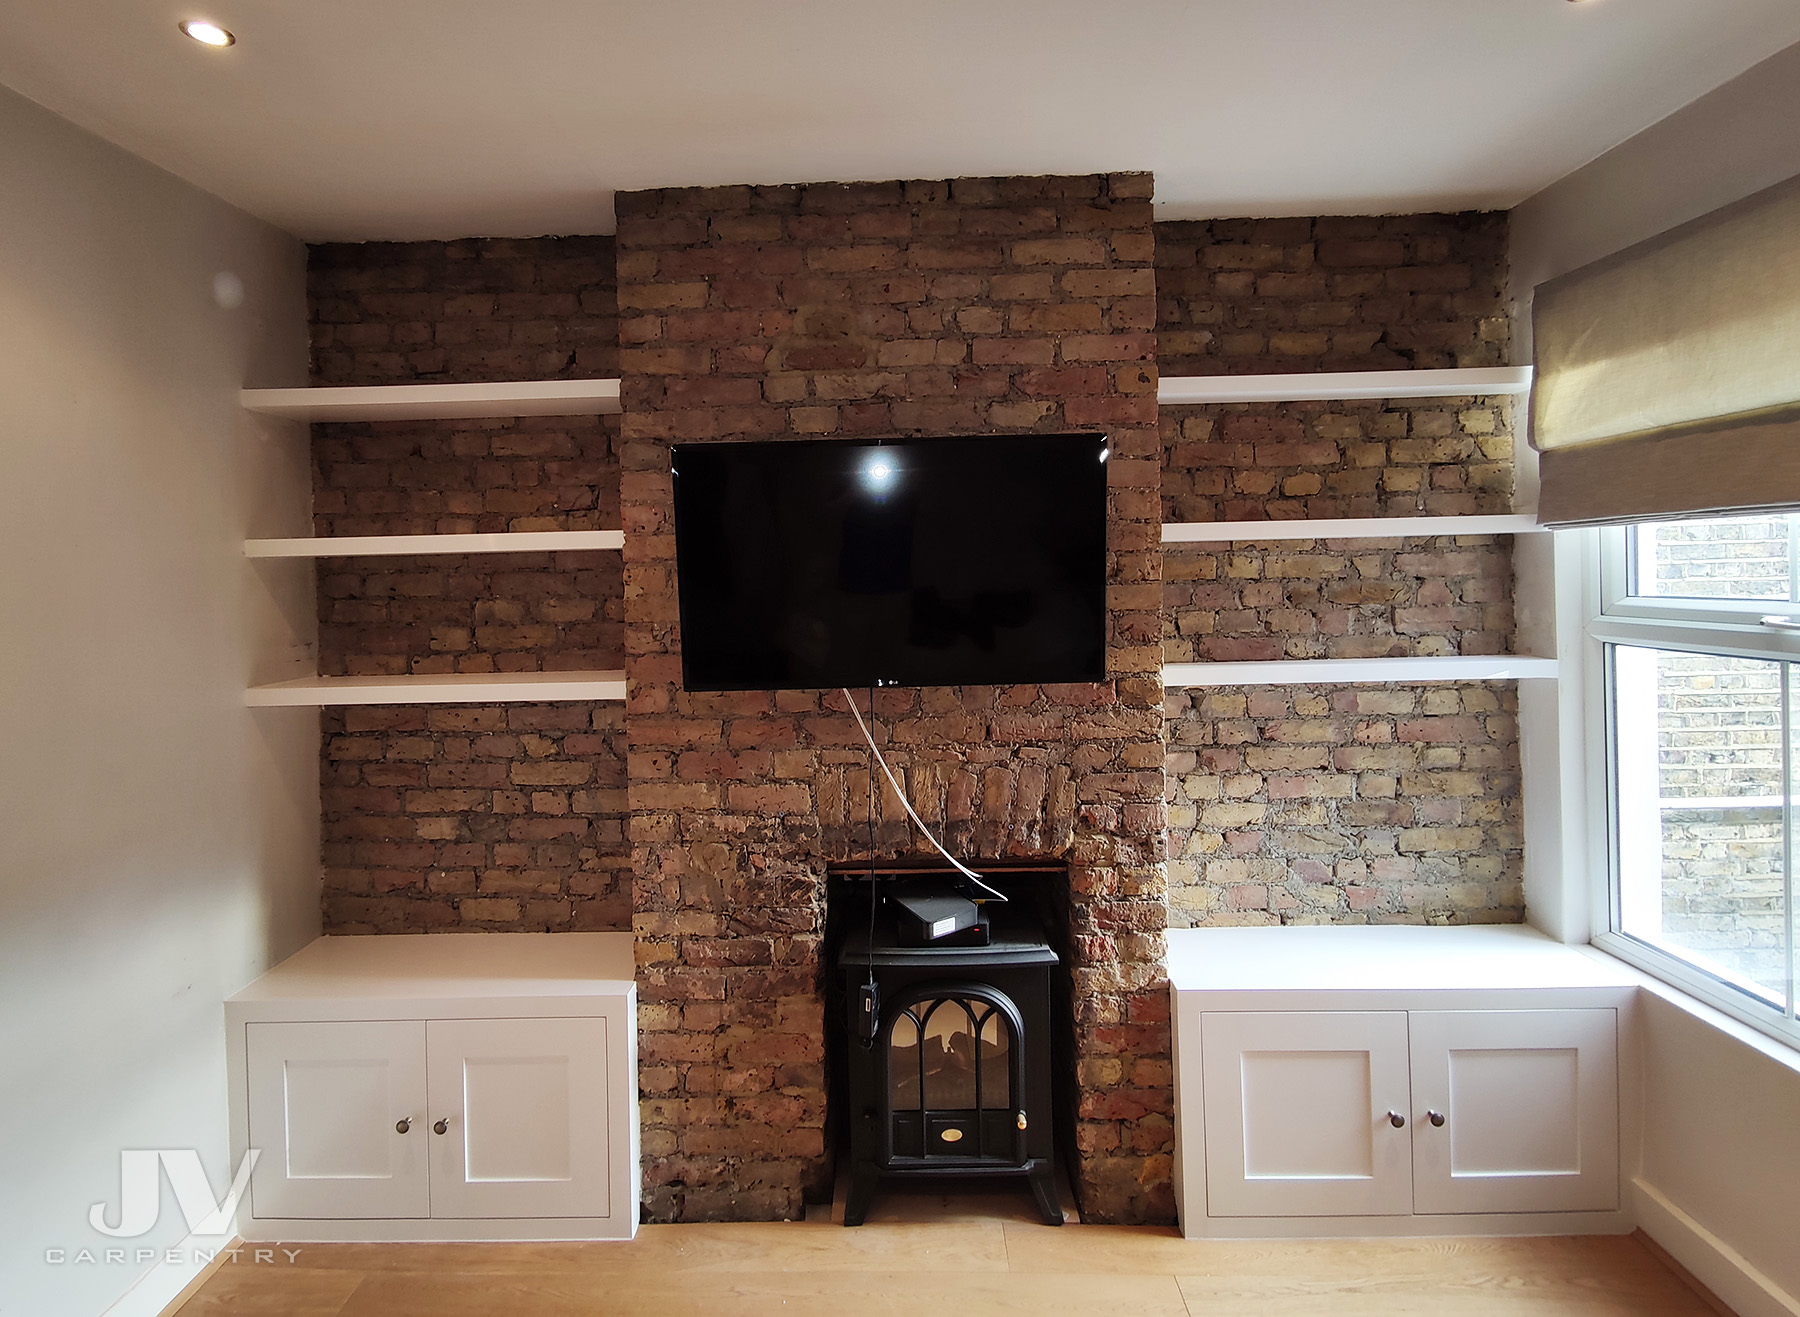 Shelving in exposed brick alcoves